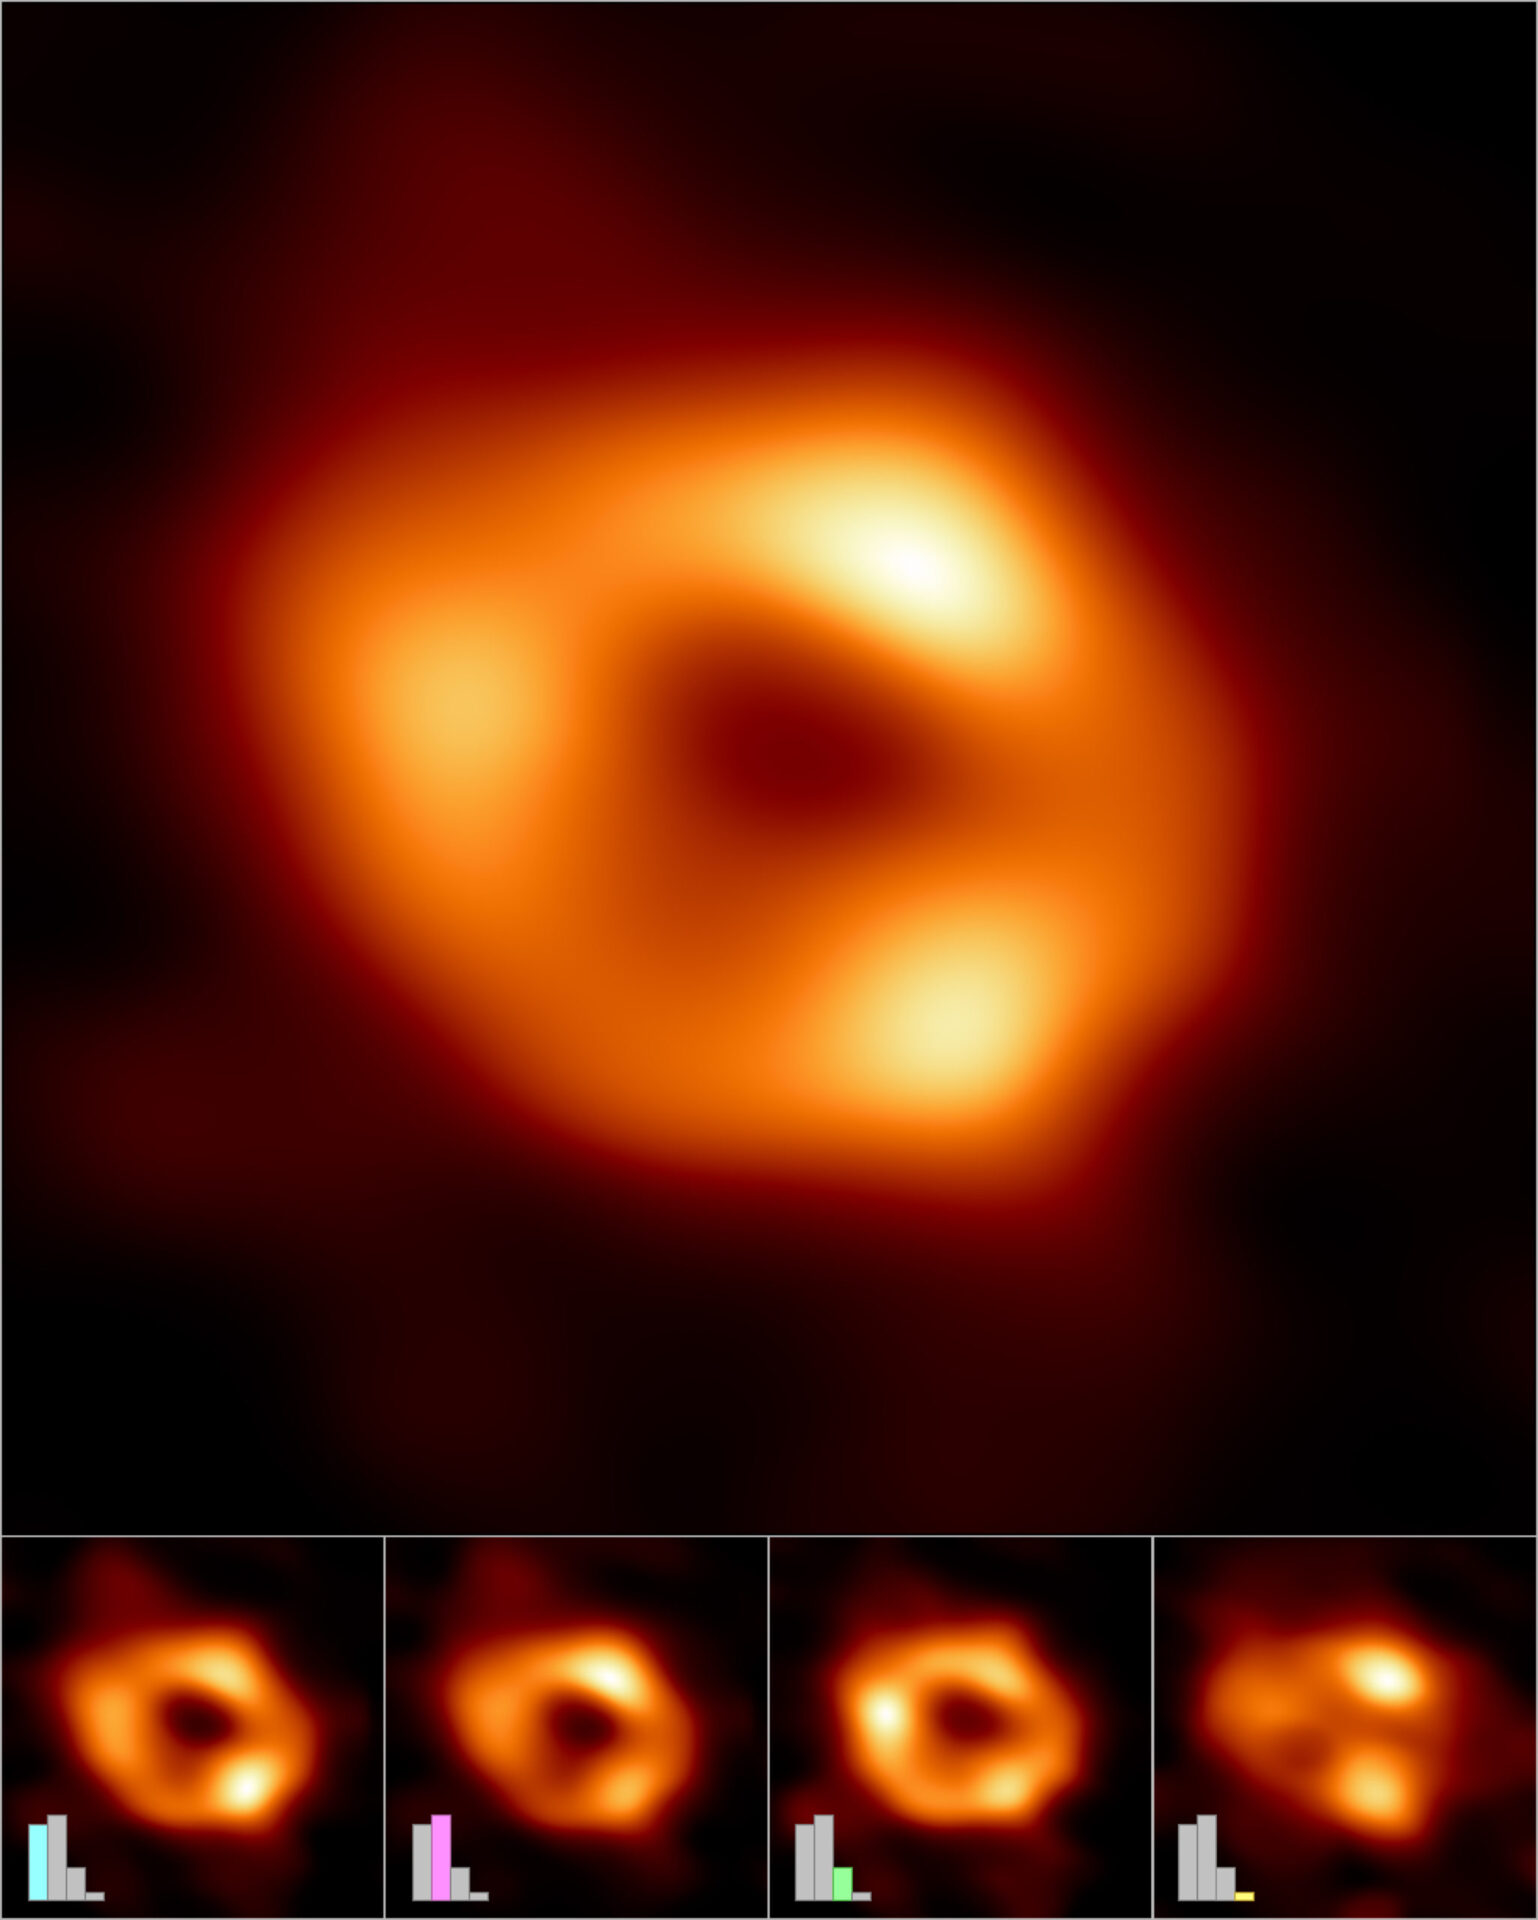 <p>The Event Horizon Telescope (EHT) Collaboration has created a single image (top frame) of the supermassive black hole at the center of our galaxy, called Sagittarius A* (or Sgr A* for short), by combining images extracted from the EHT observations.<br />
The main image was produced by averaging together thousands of images created using different computational methods — all of which accurately fit the EHT data. This averaged image retains features more commonly seen in the varied images, and suppresses features that appear infrequently.<br />
The images can also be clustered into four groups based on similar features. An averaged, representative image for each of the four clusters is shown in the bottom row. Three of the clusters show a ring structure but, with differently distributed brightness around the ring. The fourth cluster contains images that also fit the data but do not appear ring-like.<br />
The bar graphs show the relative number of images belonging to each cluster. Thousands of images fell into each of the first three clusters, while the fourth and smallest cluster contains only hundreds of images. The heights of the bars indicate the relative 